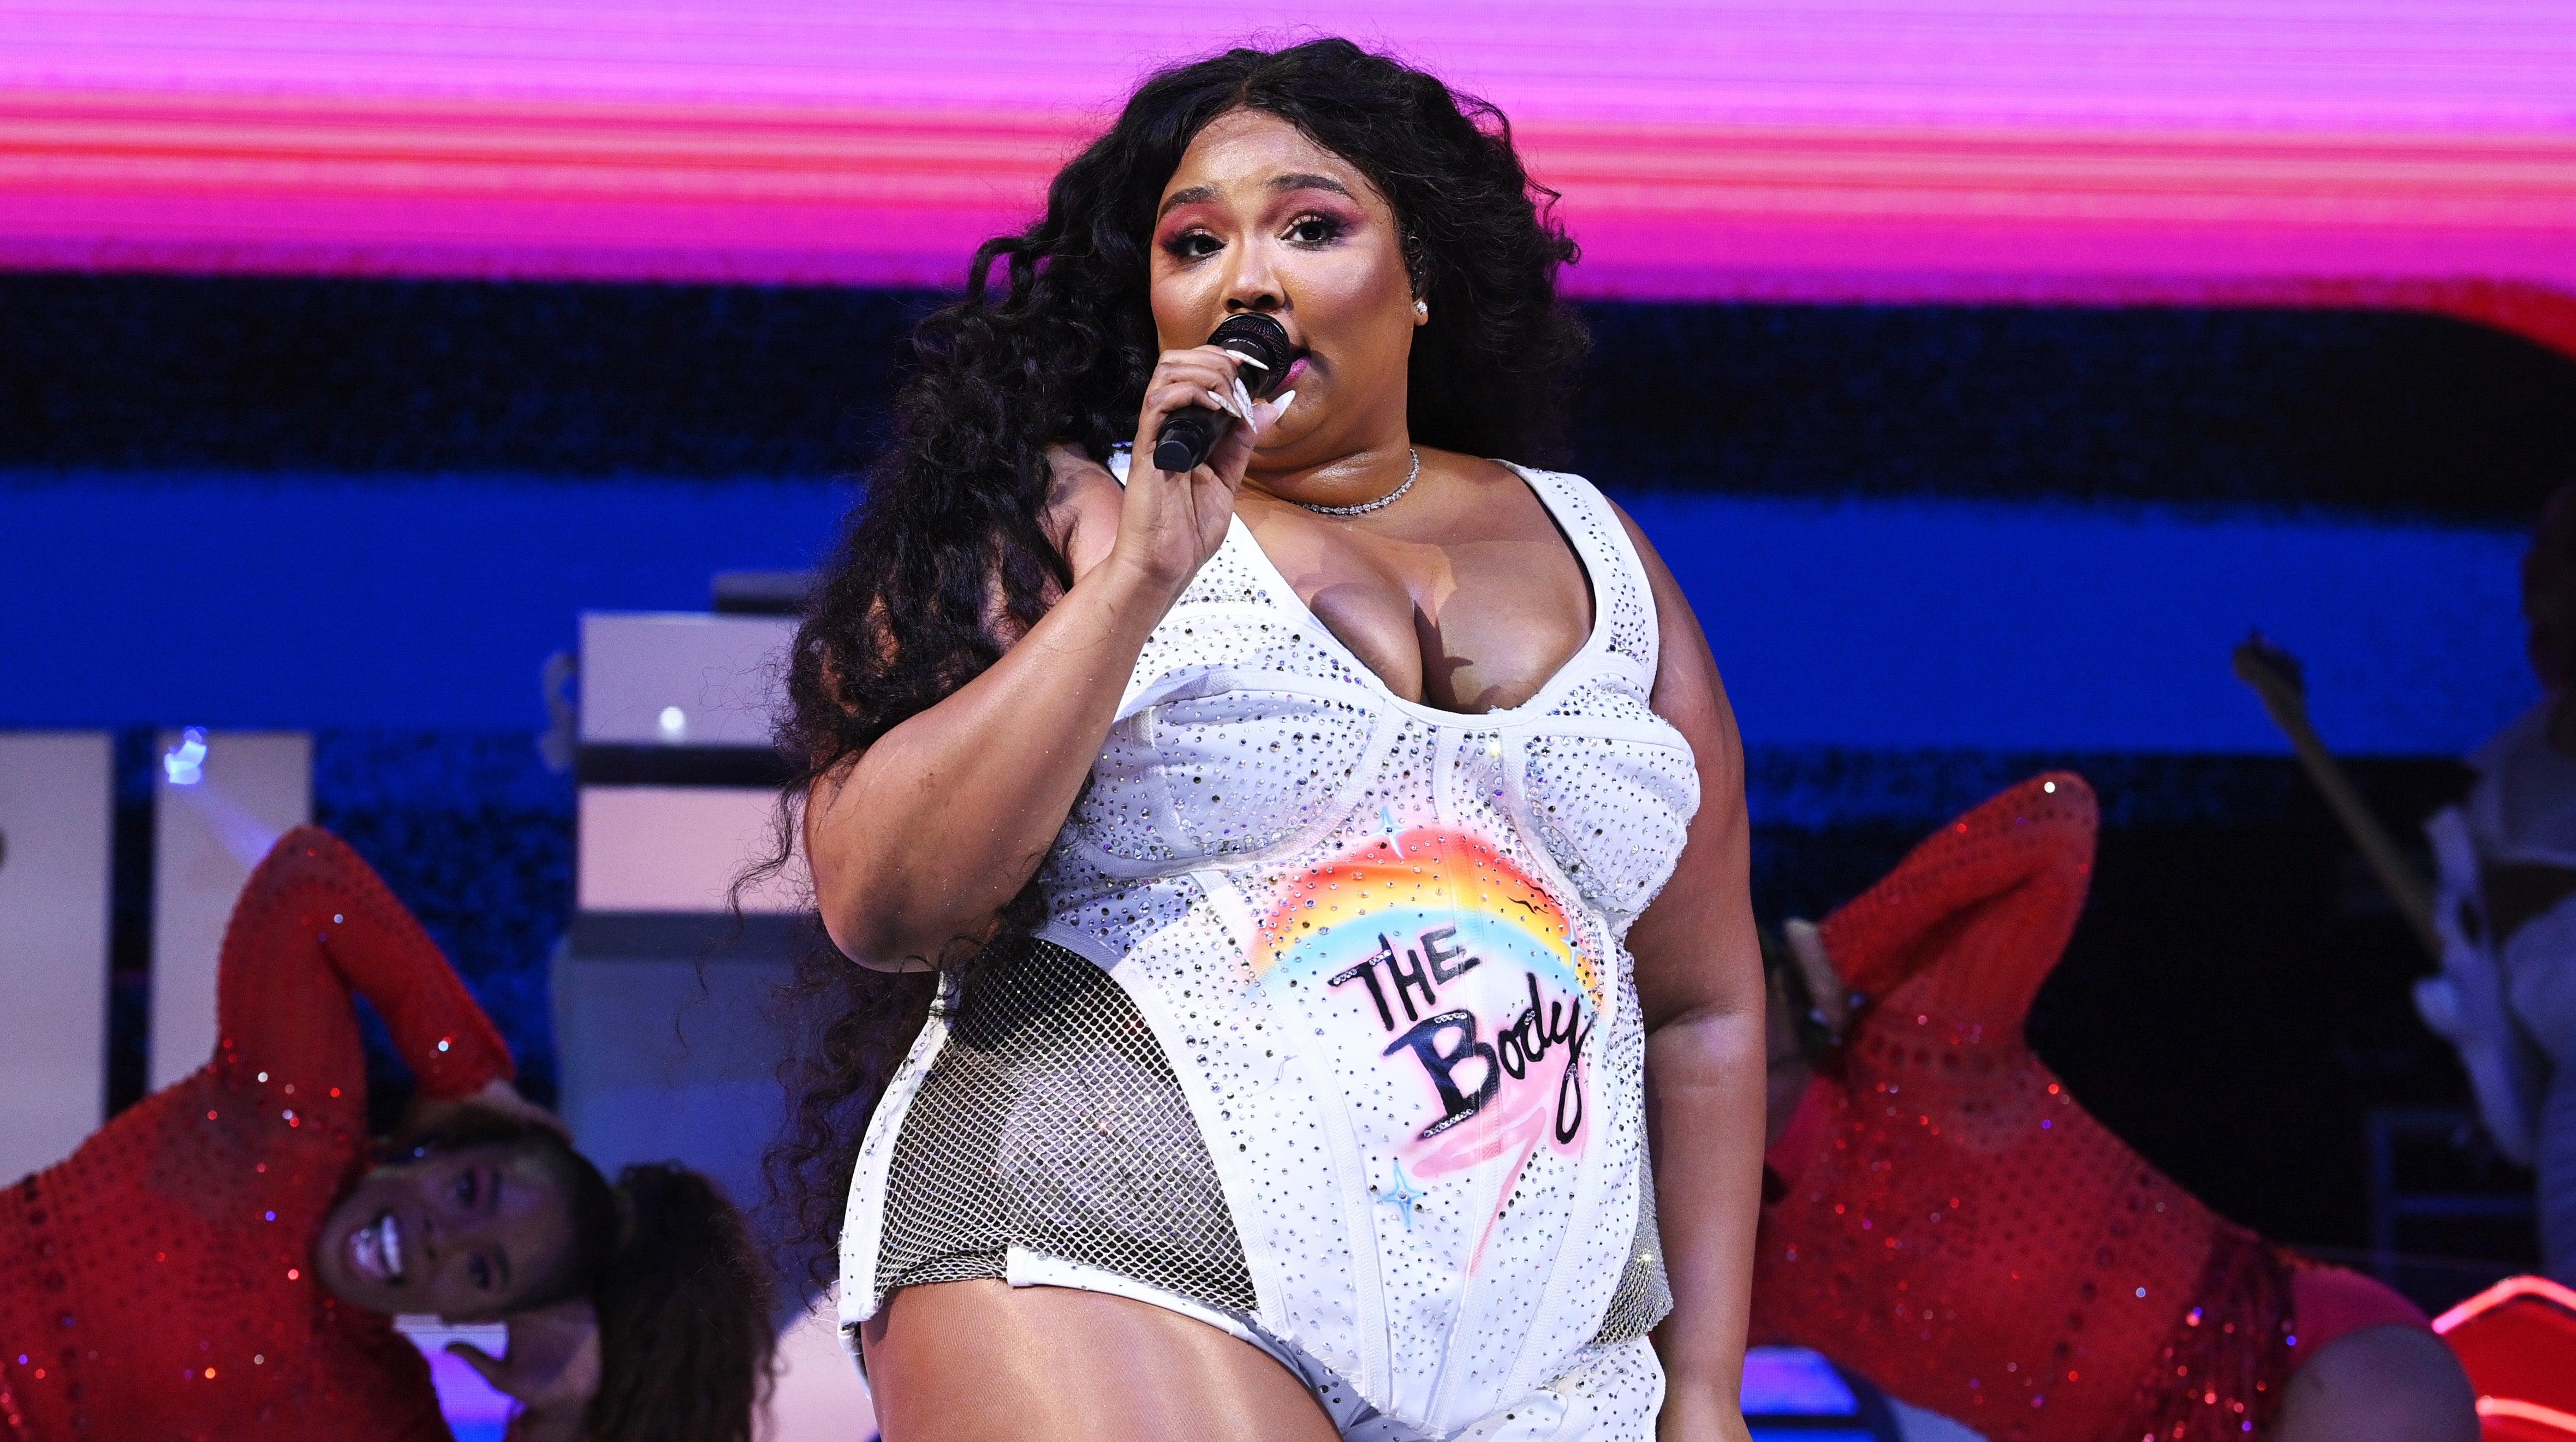 Lizzo is hunting for a new dance squad in trailer for Watch Out For The Big Grrrls competition series